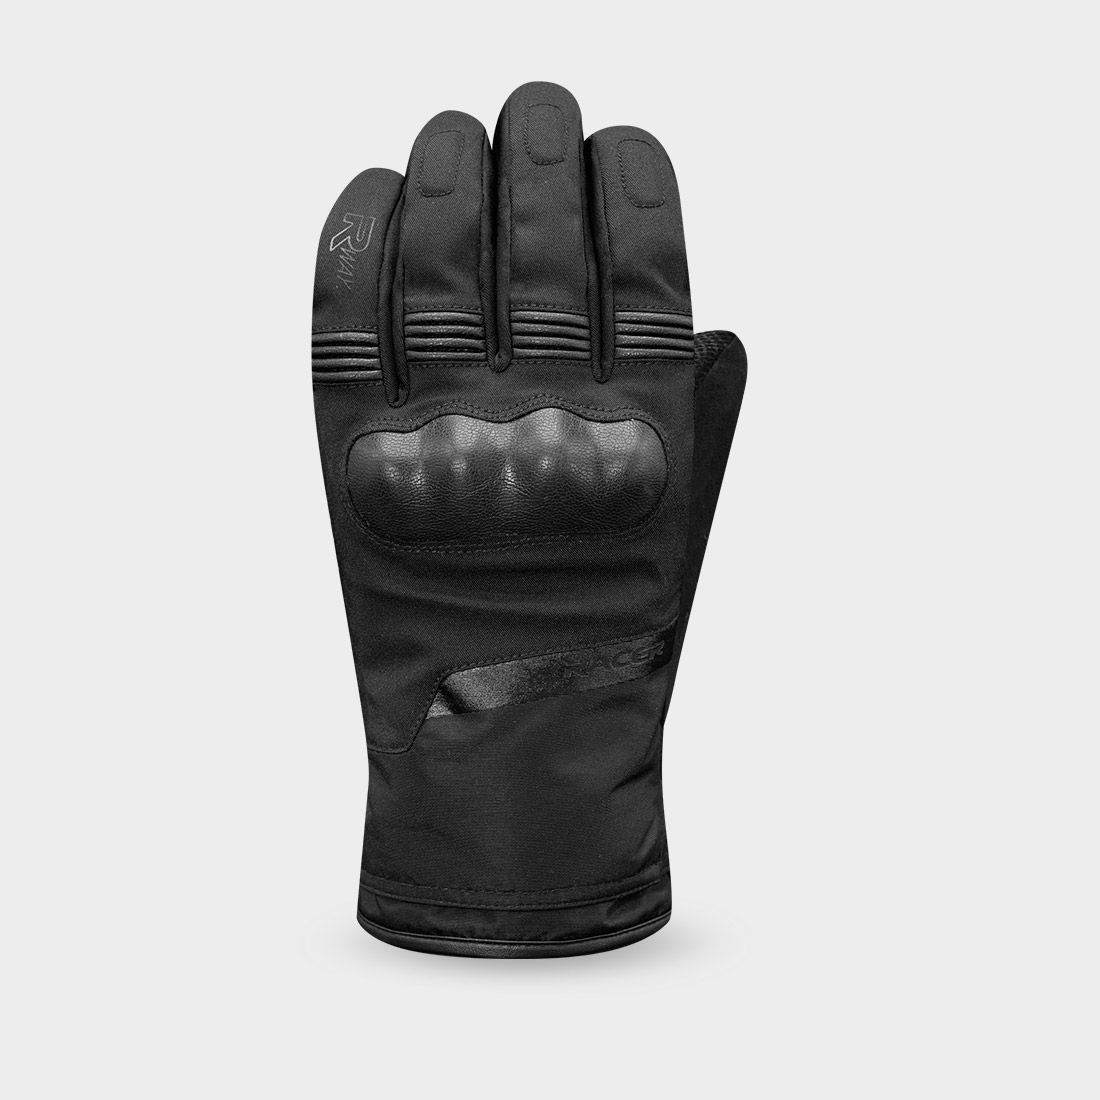 R-WAY - MOTORCYCLE GLOVES